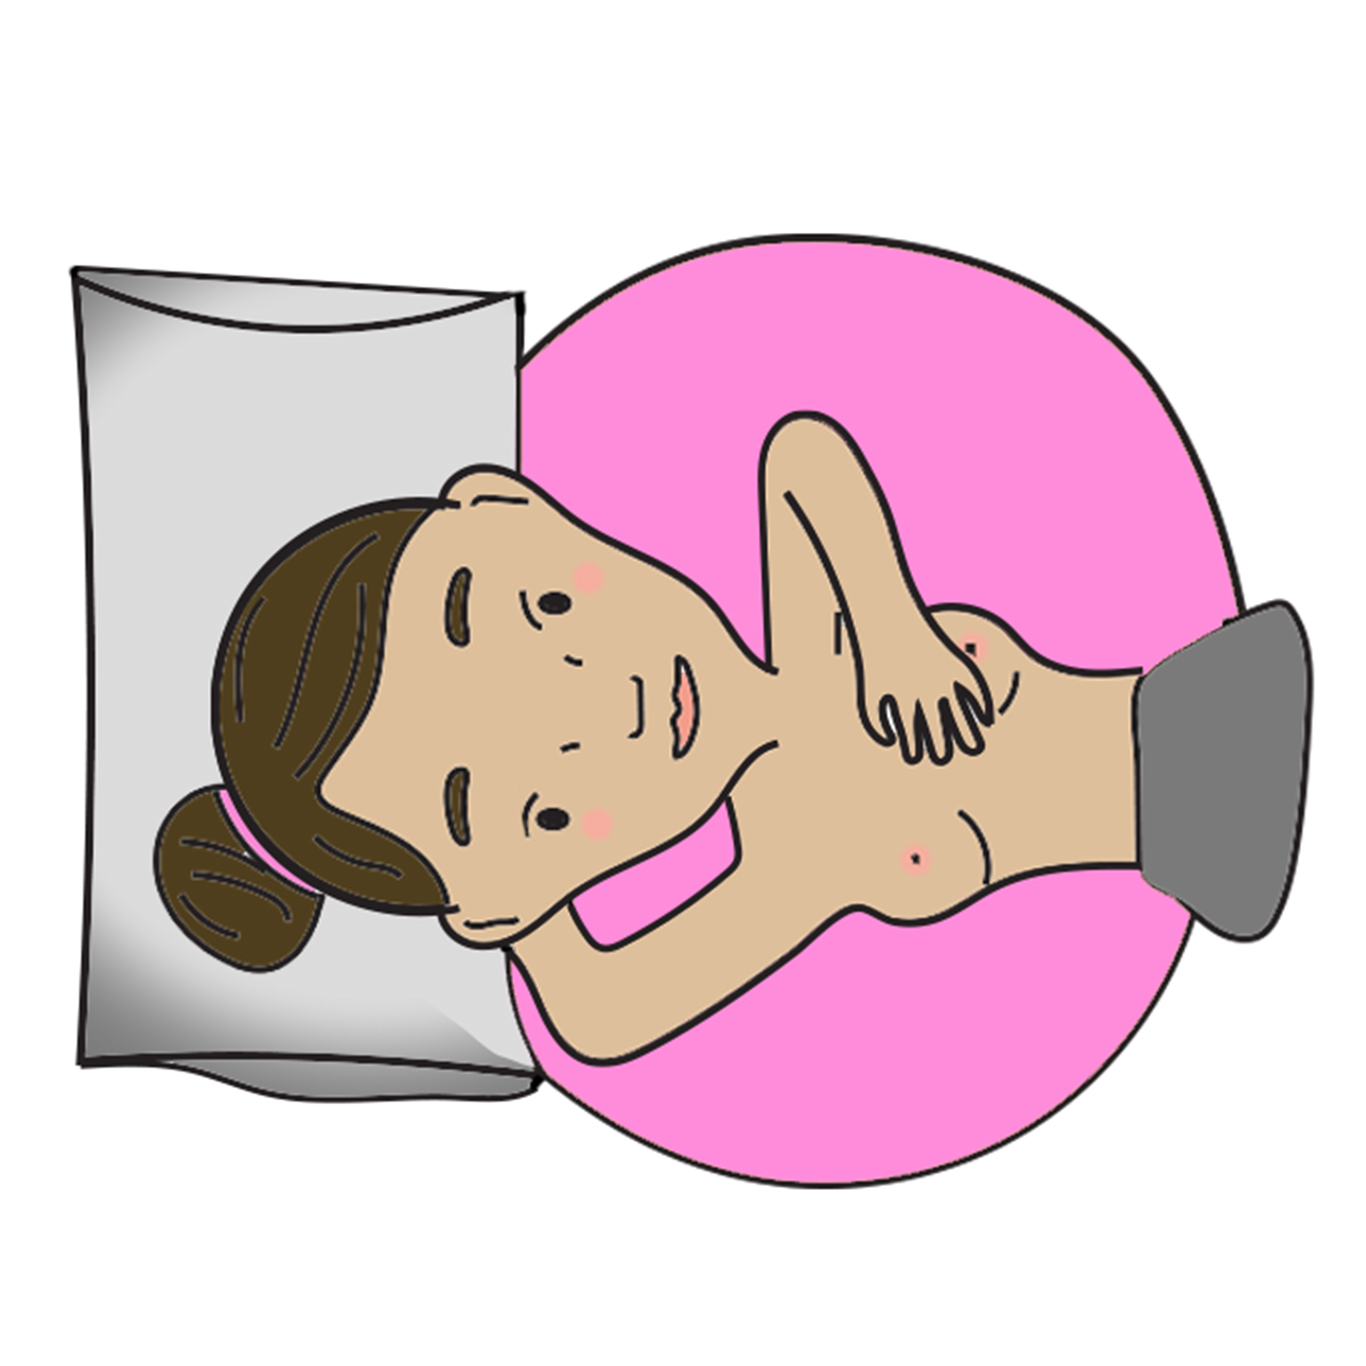 STEP 2: LYING DOWN CHECK. Lying on your back helps flatten your breast tissue, making it easier to examine. Use the pads of your three middle fingers moving around the entire breast in a circular pattern. Cover the entire breast area from your breastbone to your armpit and from the bottom of your breast to your collarbone. Feel for any lumps or thickened areas.